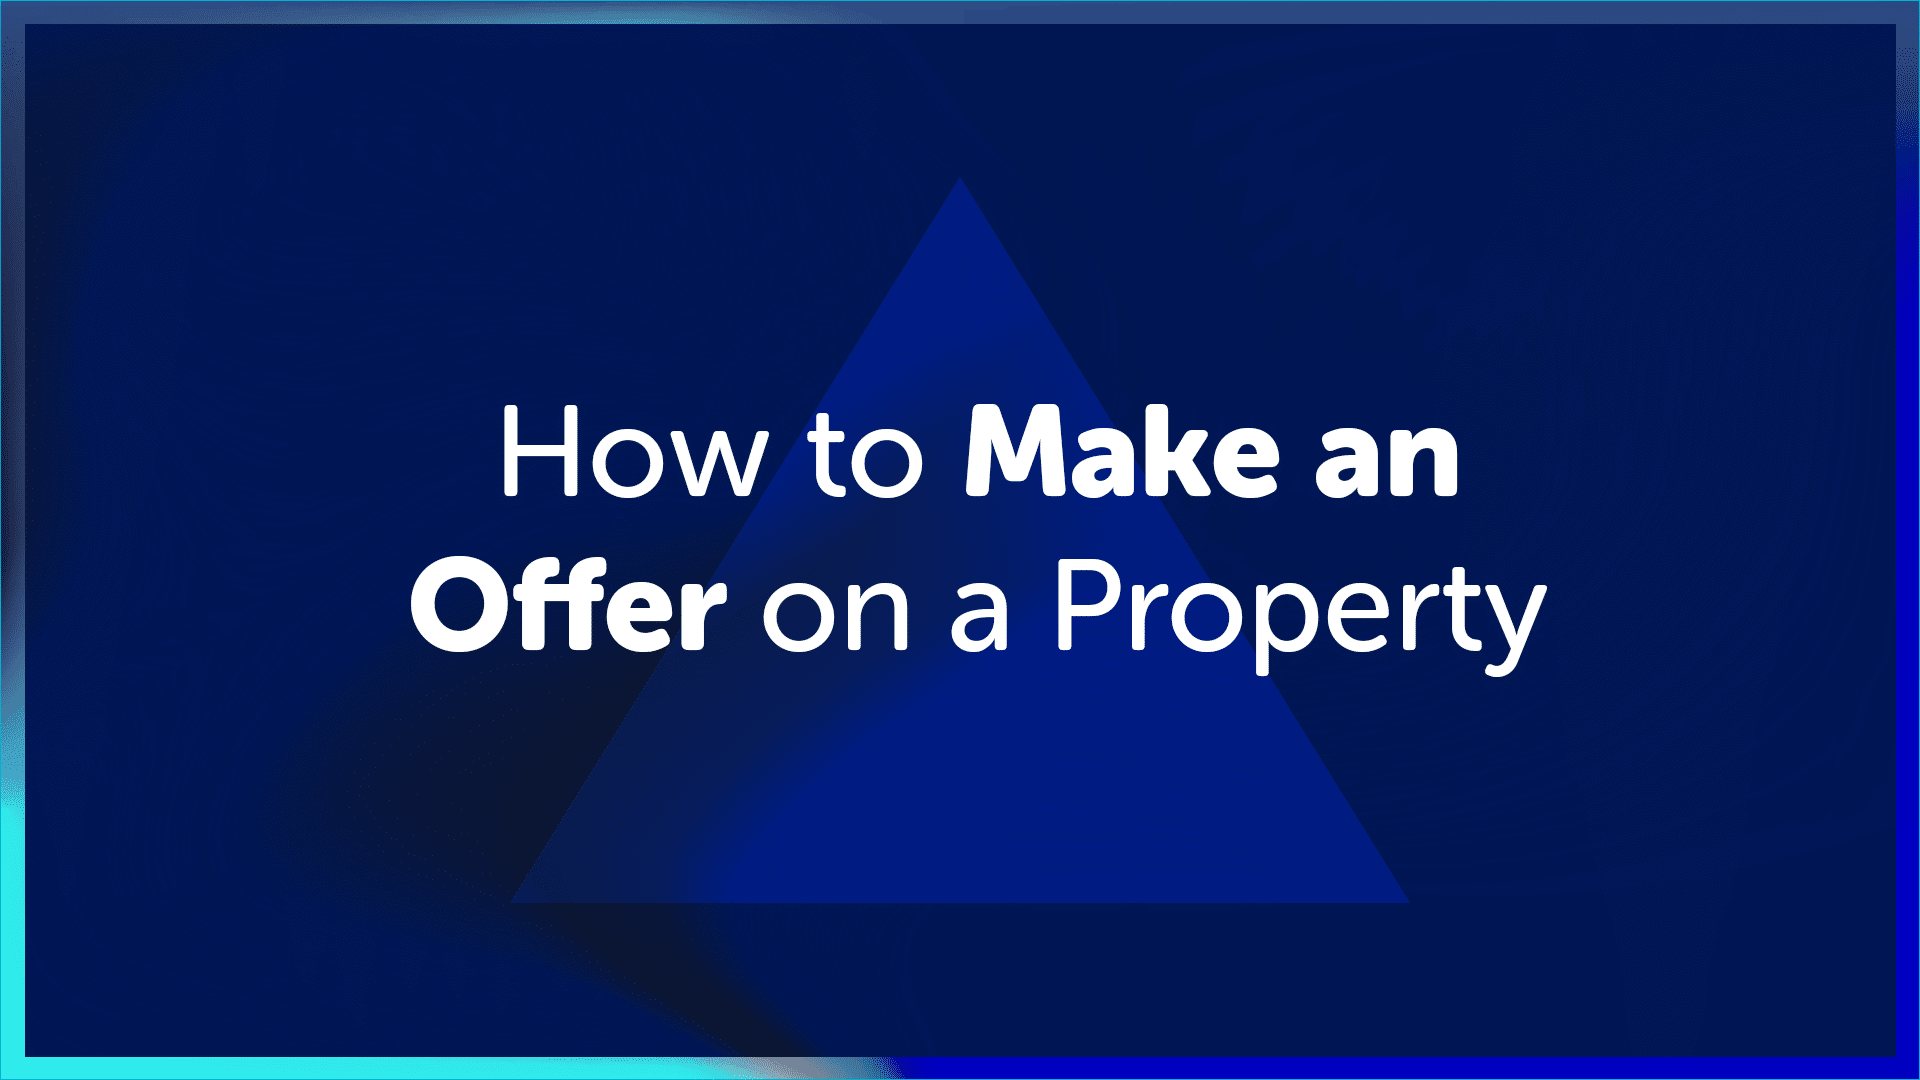 How to Make an Offer on a Property in Lincoln